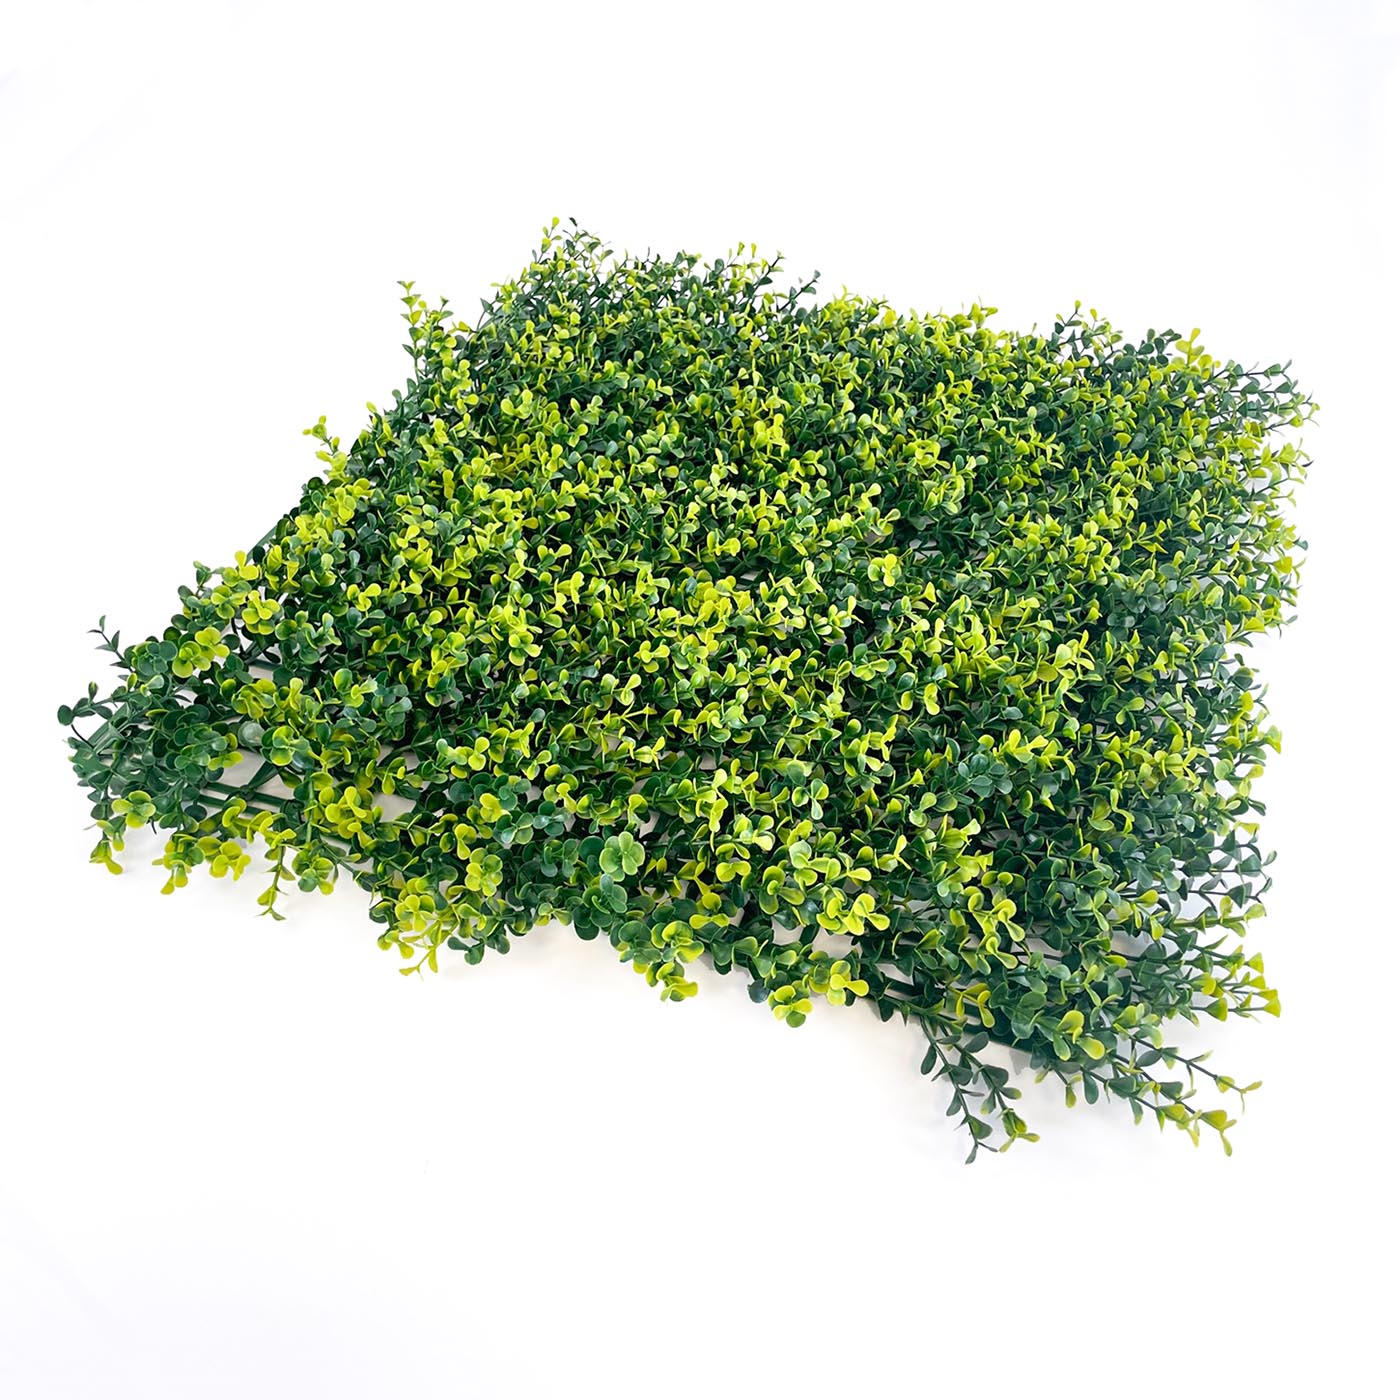 Boxwood natural artificial hedge tile with mixed light and dark green foliage